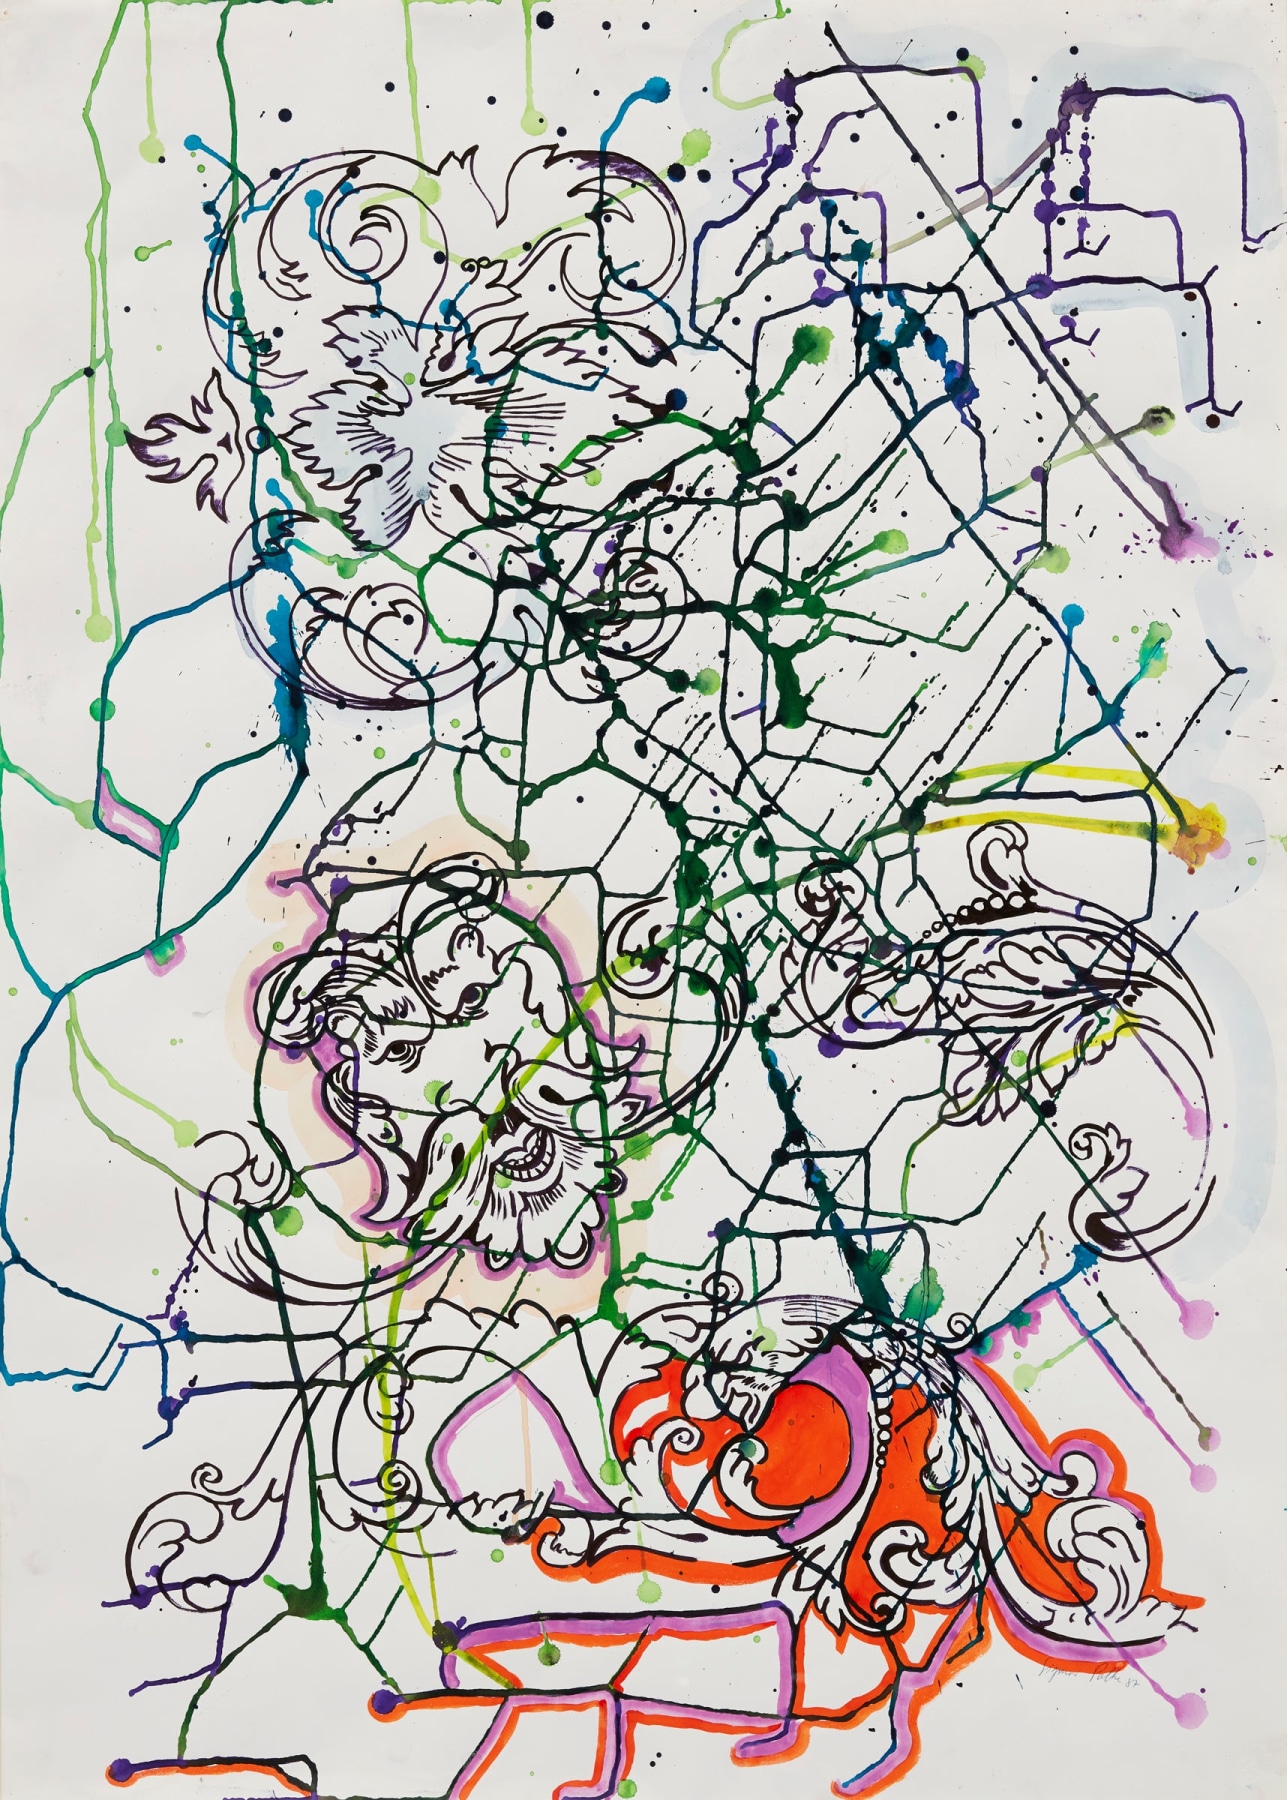 Sigmar Polke
&amp;quot;Untitled&amp;quot;, 1987
Gouache, watercolor, ink on paper
39 1/2 x 28 1/2 inches
100.5 x 72.5 cm
POZ 273